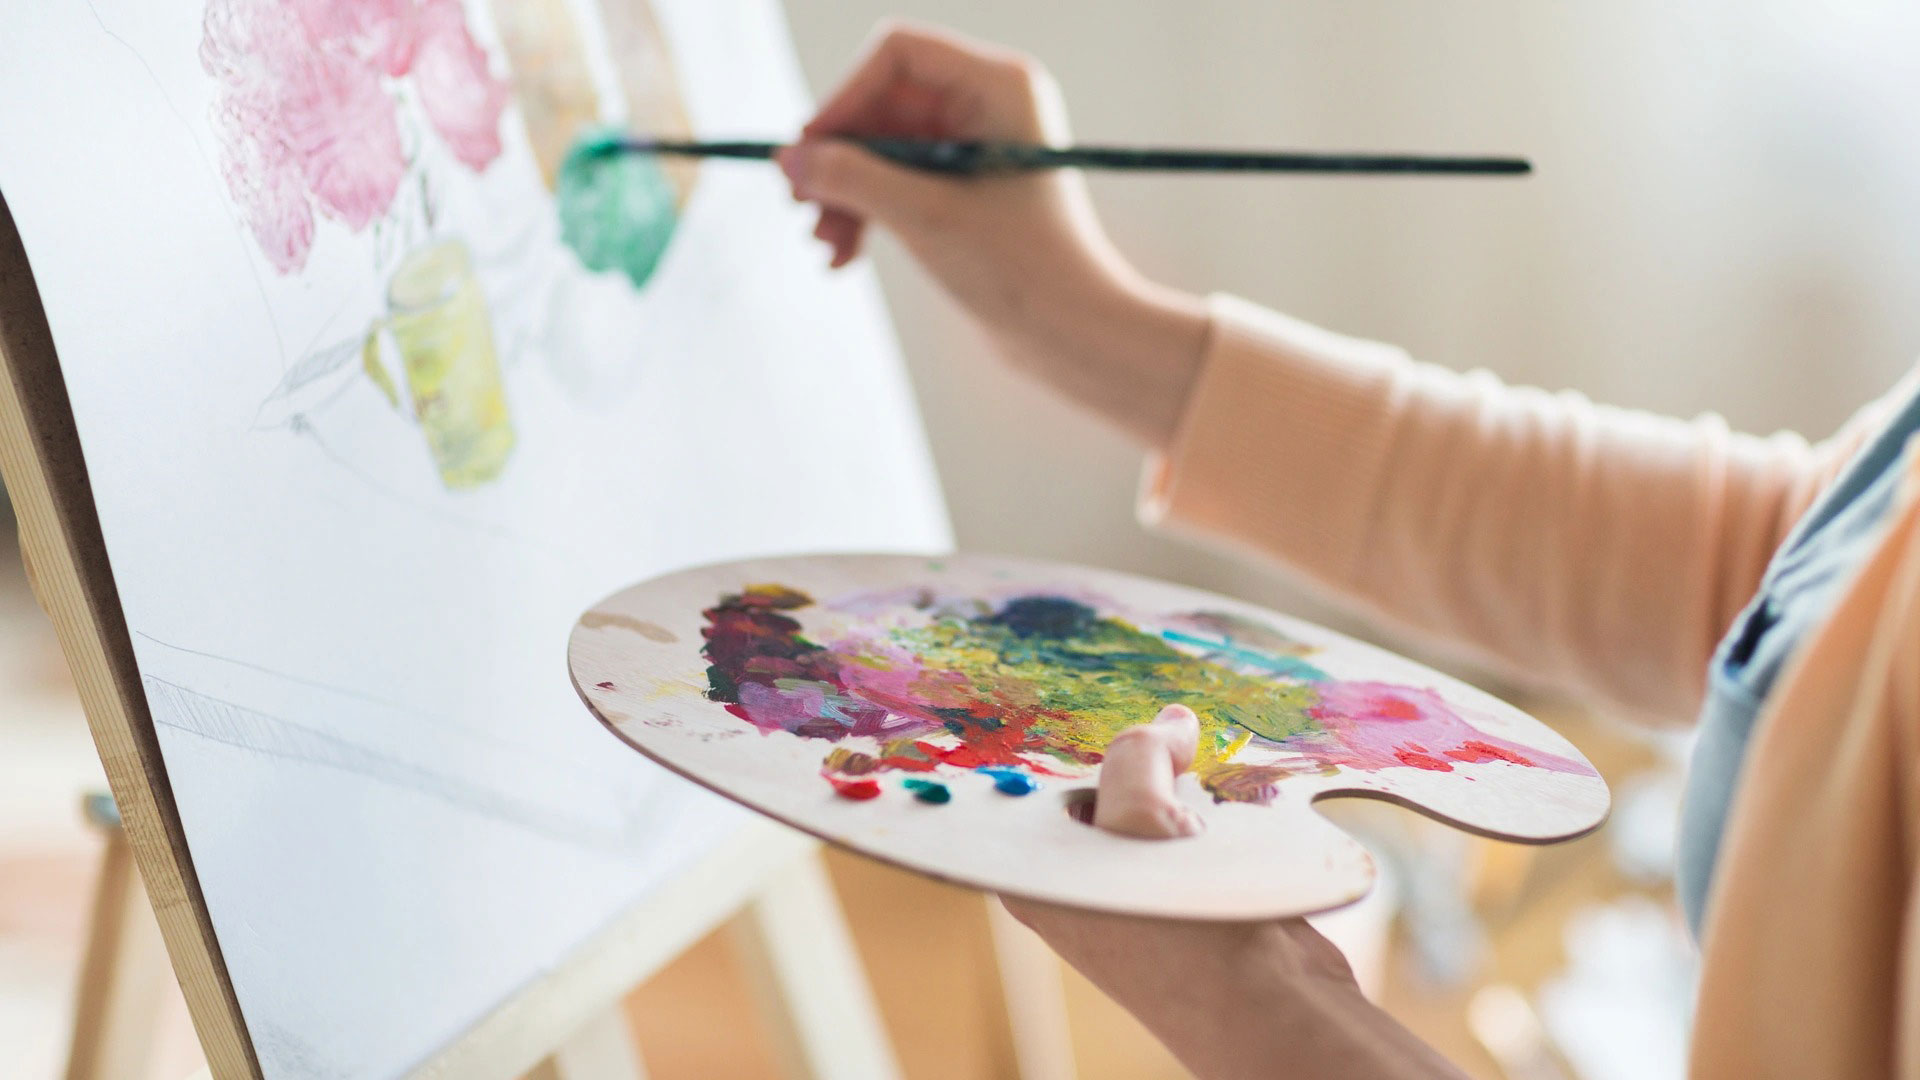 Person painting on an easel holding palette